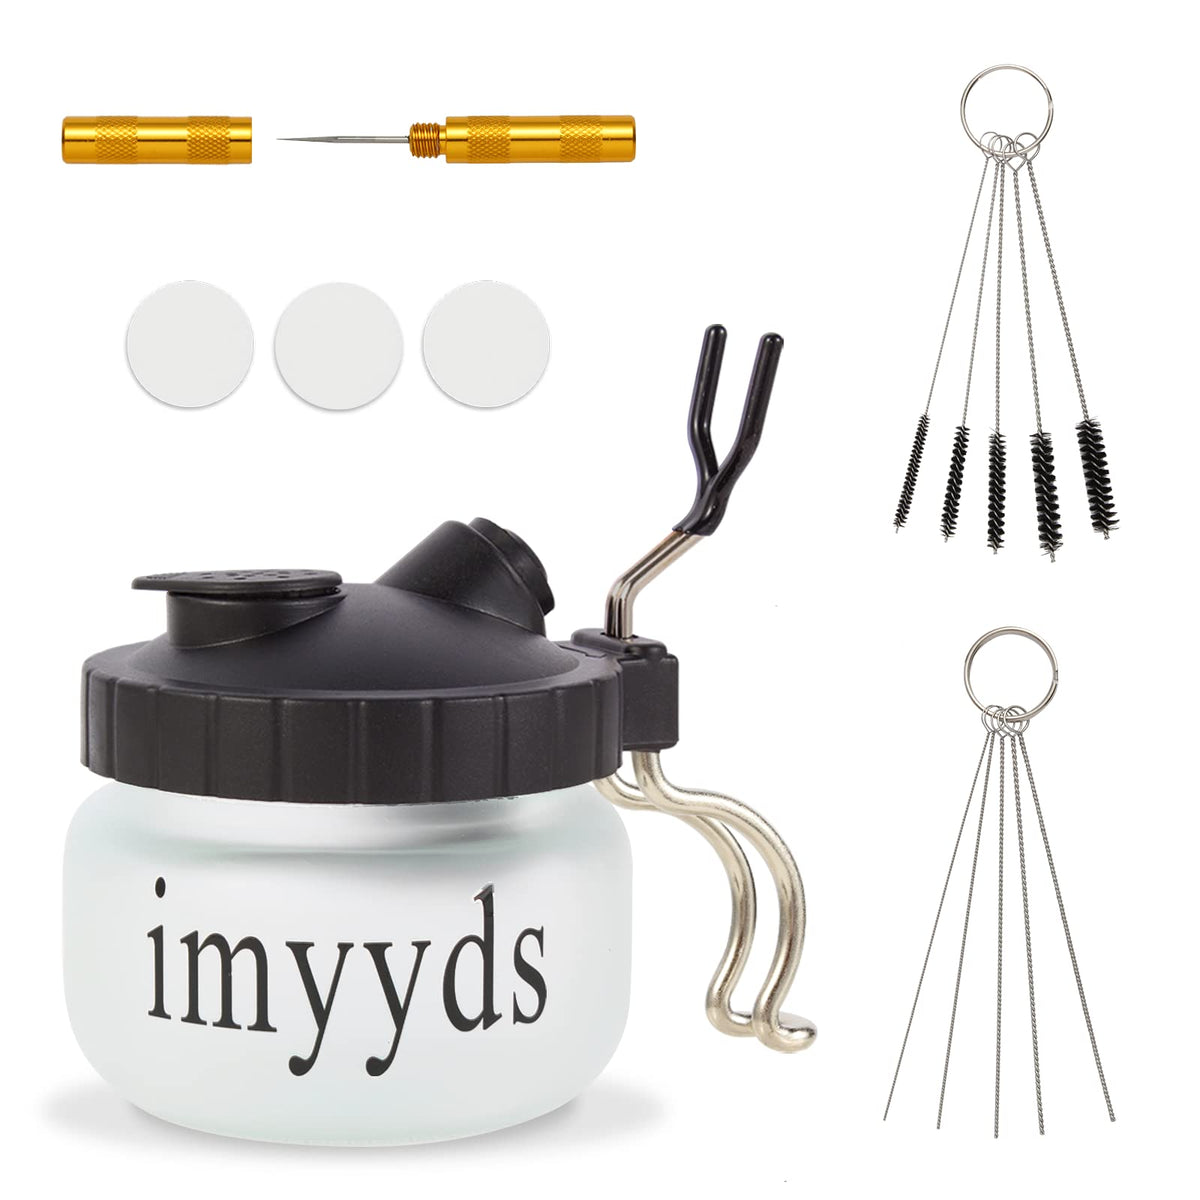 imyyds Airbrush Cleaning Kit, Airbrush Cleaning Pot, Airbrush